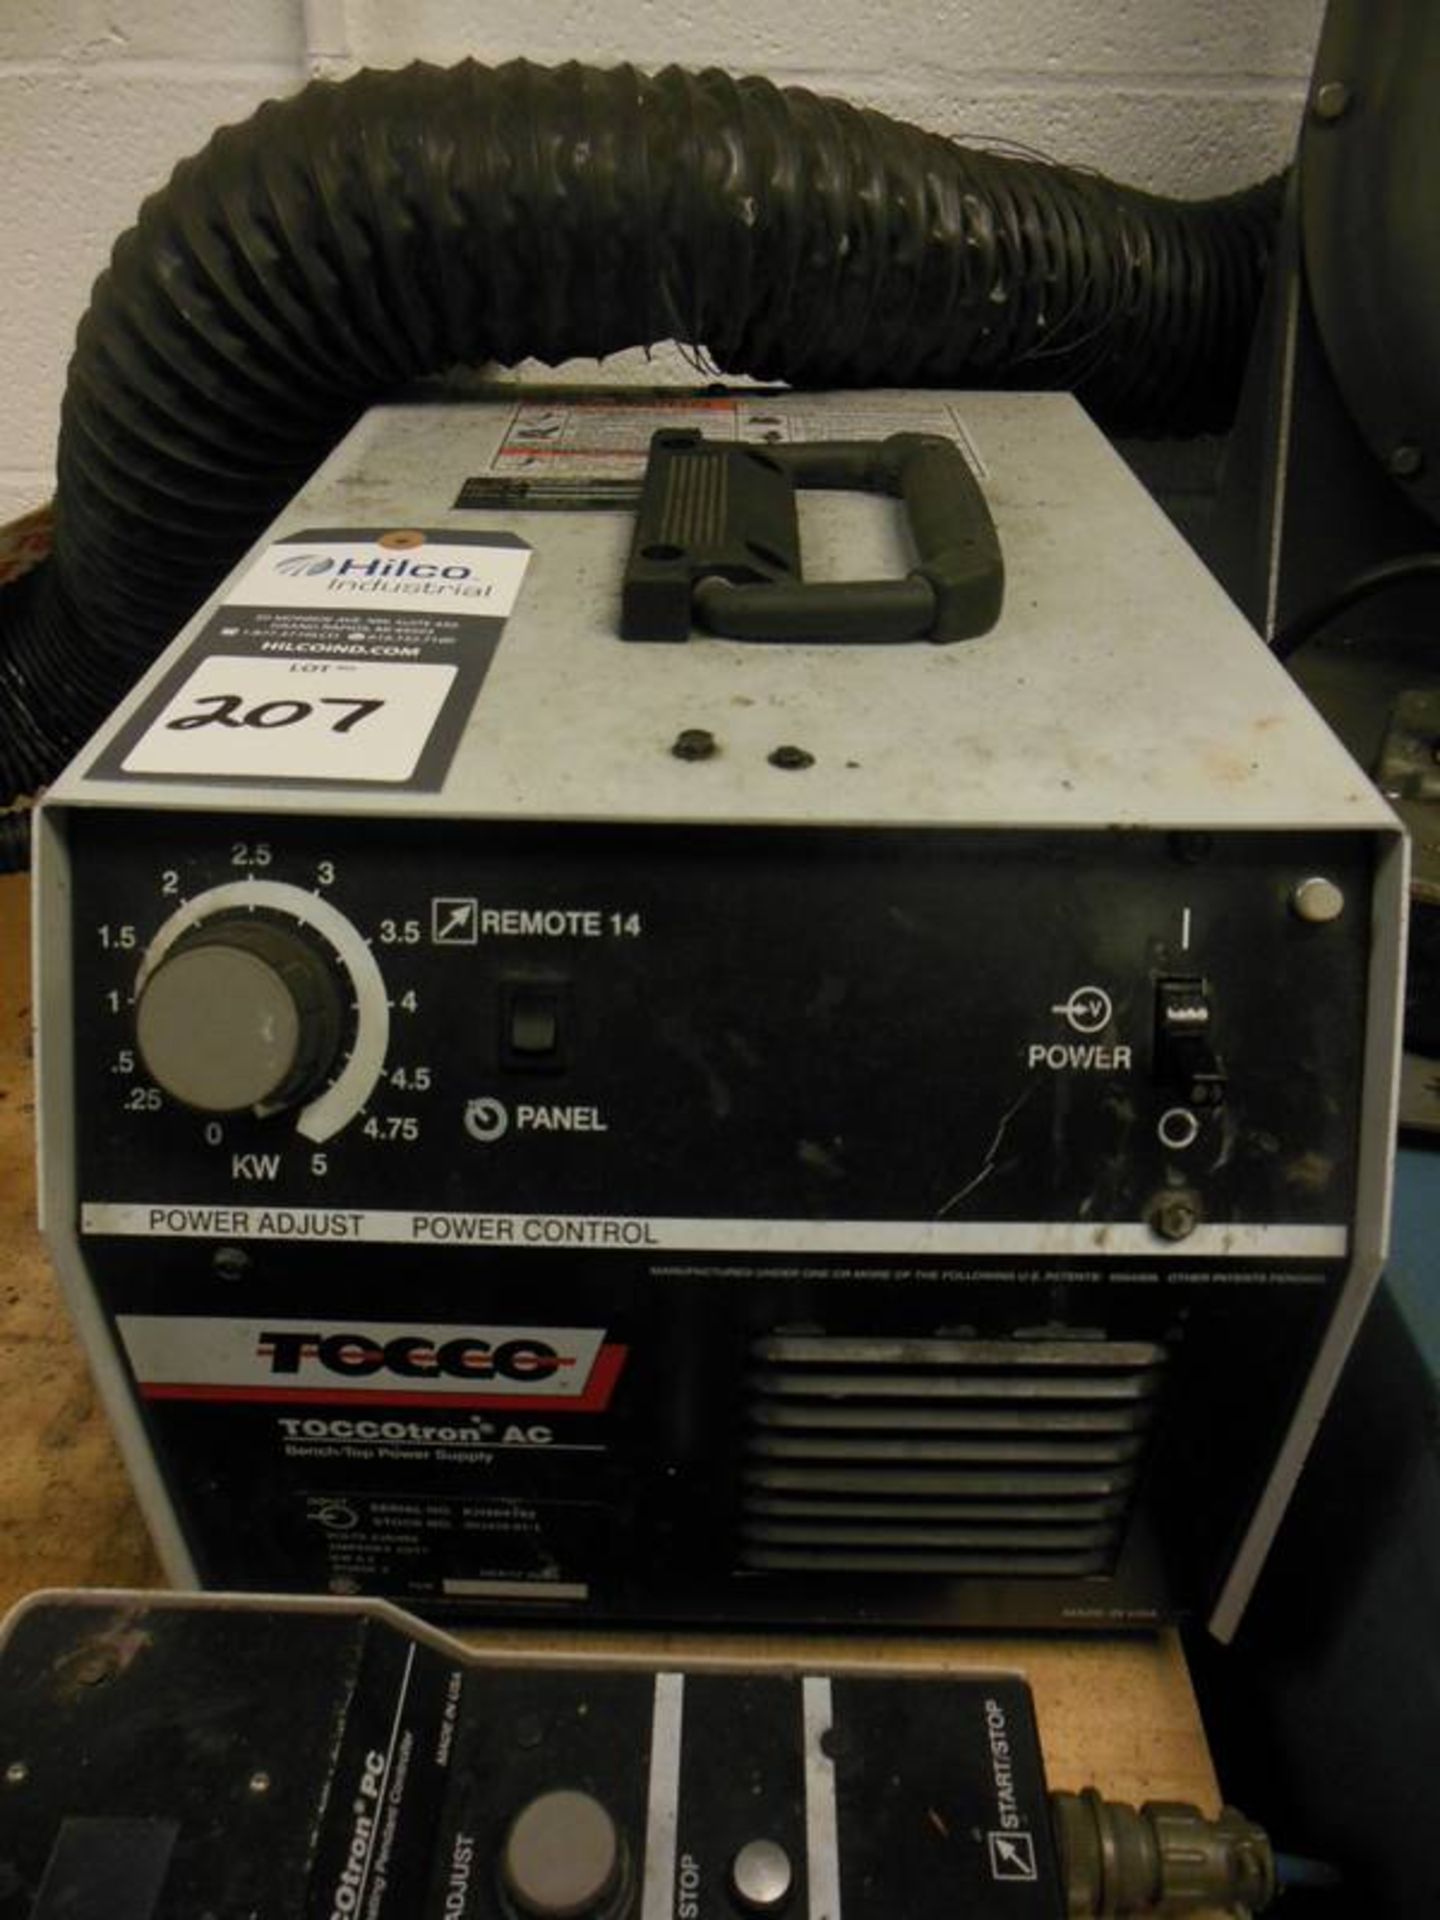 Tocco Model 903439-01-1 Induction Hardener AC Power Supply; Serial Number: KH569192; with Oendant